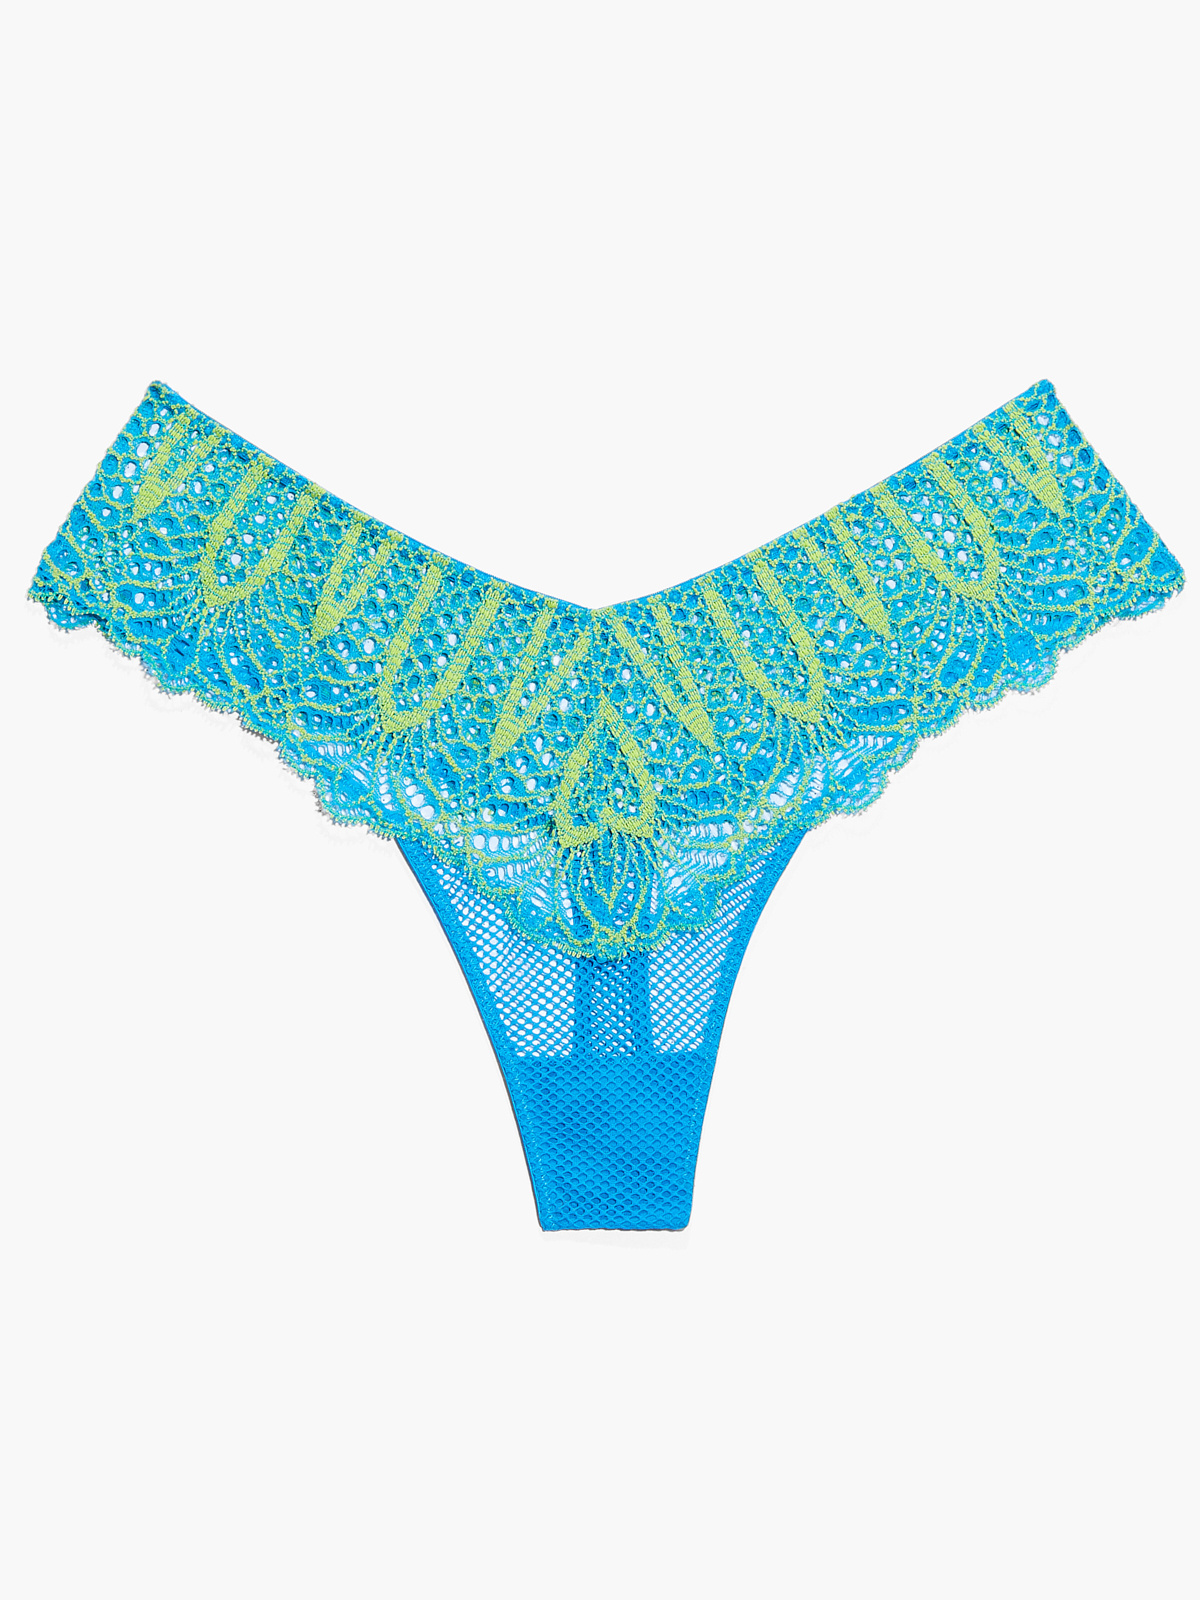 Stranded In Lace Crochet Thong